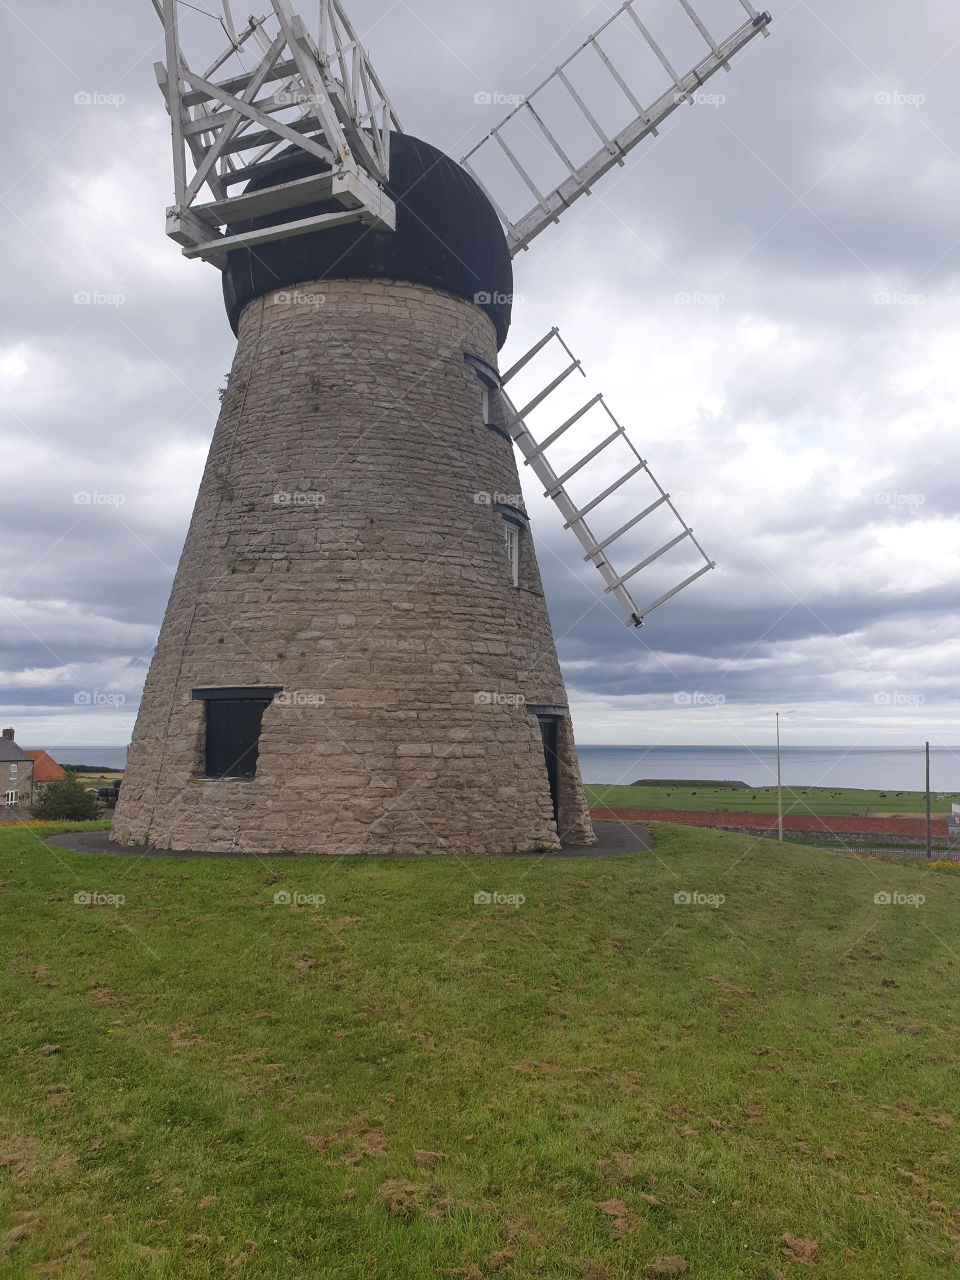 scenery with and old windmill